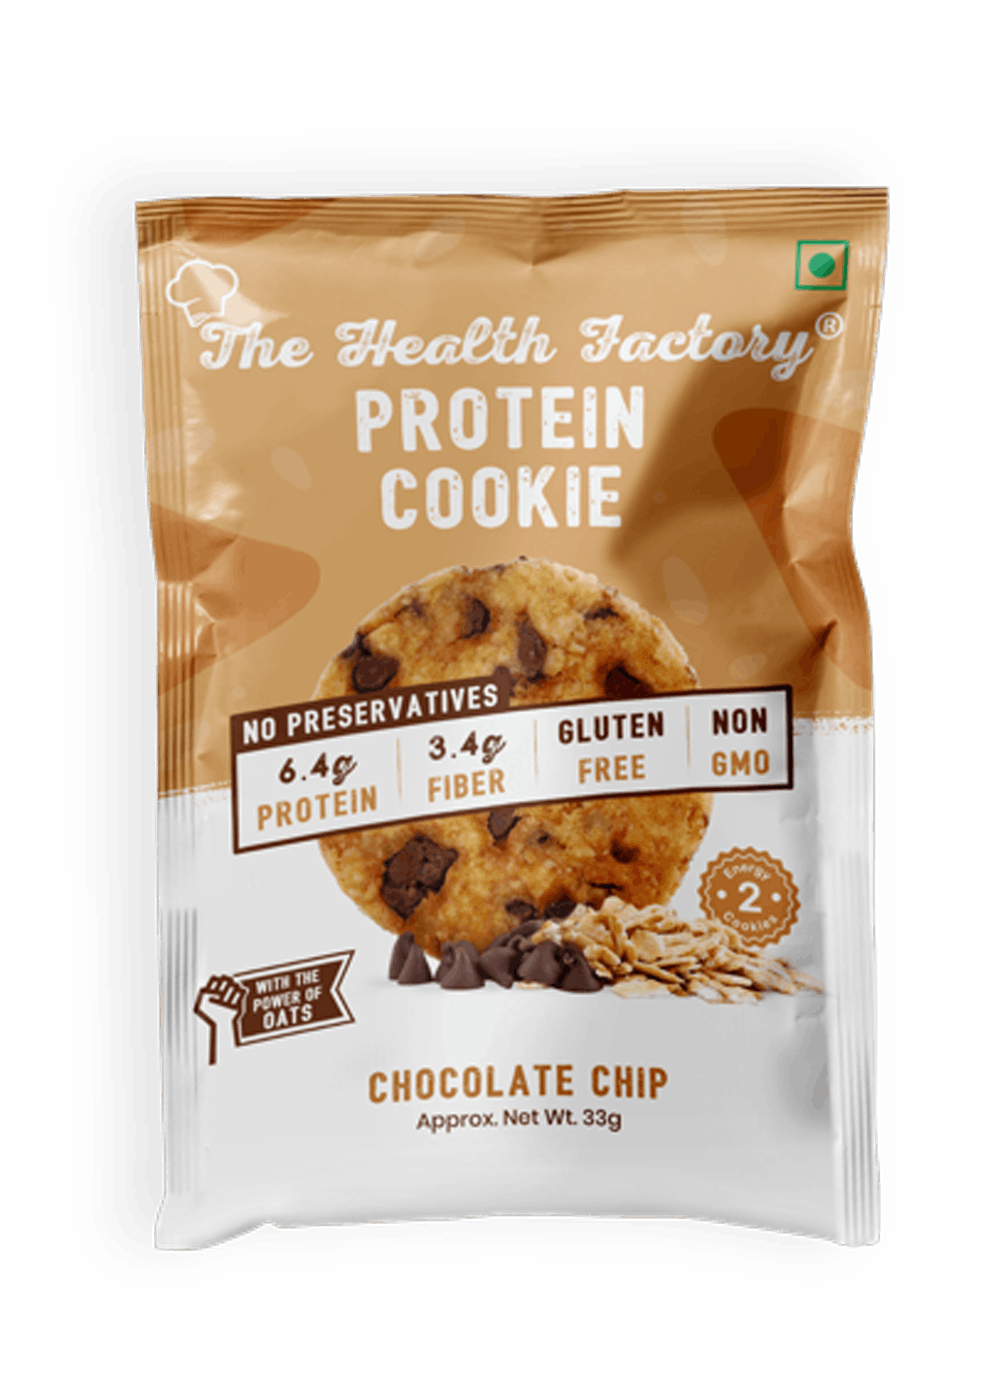 Naked Chocolate Chip Protein Cookies - Premium Gluten-Free High Protein  Cookies, Only 1G Sugar, 6G Fiber, No Artificial Sweeteners, Soy Free, No  GMOs